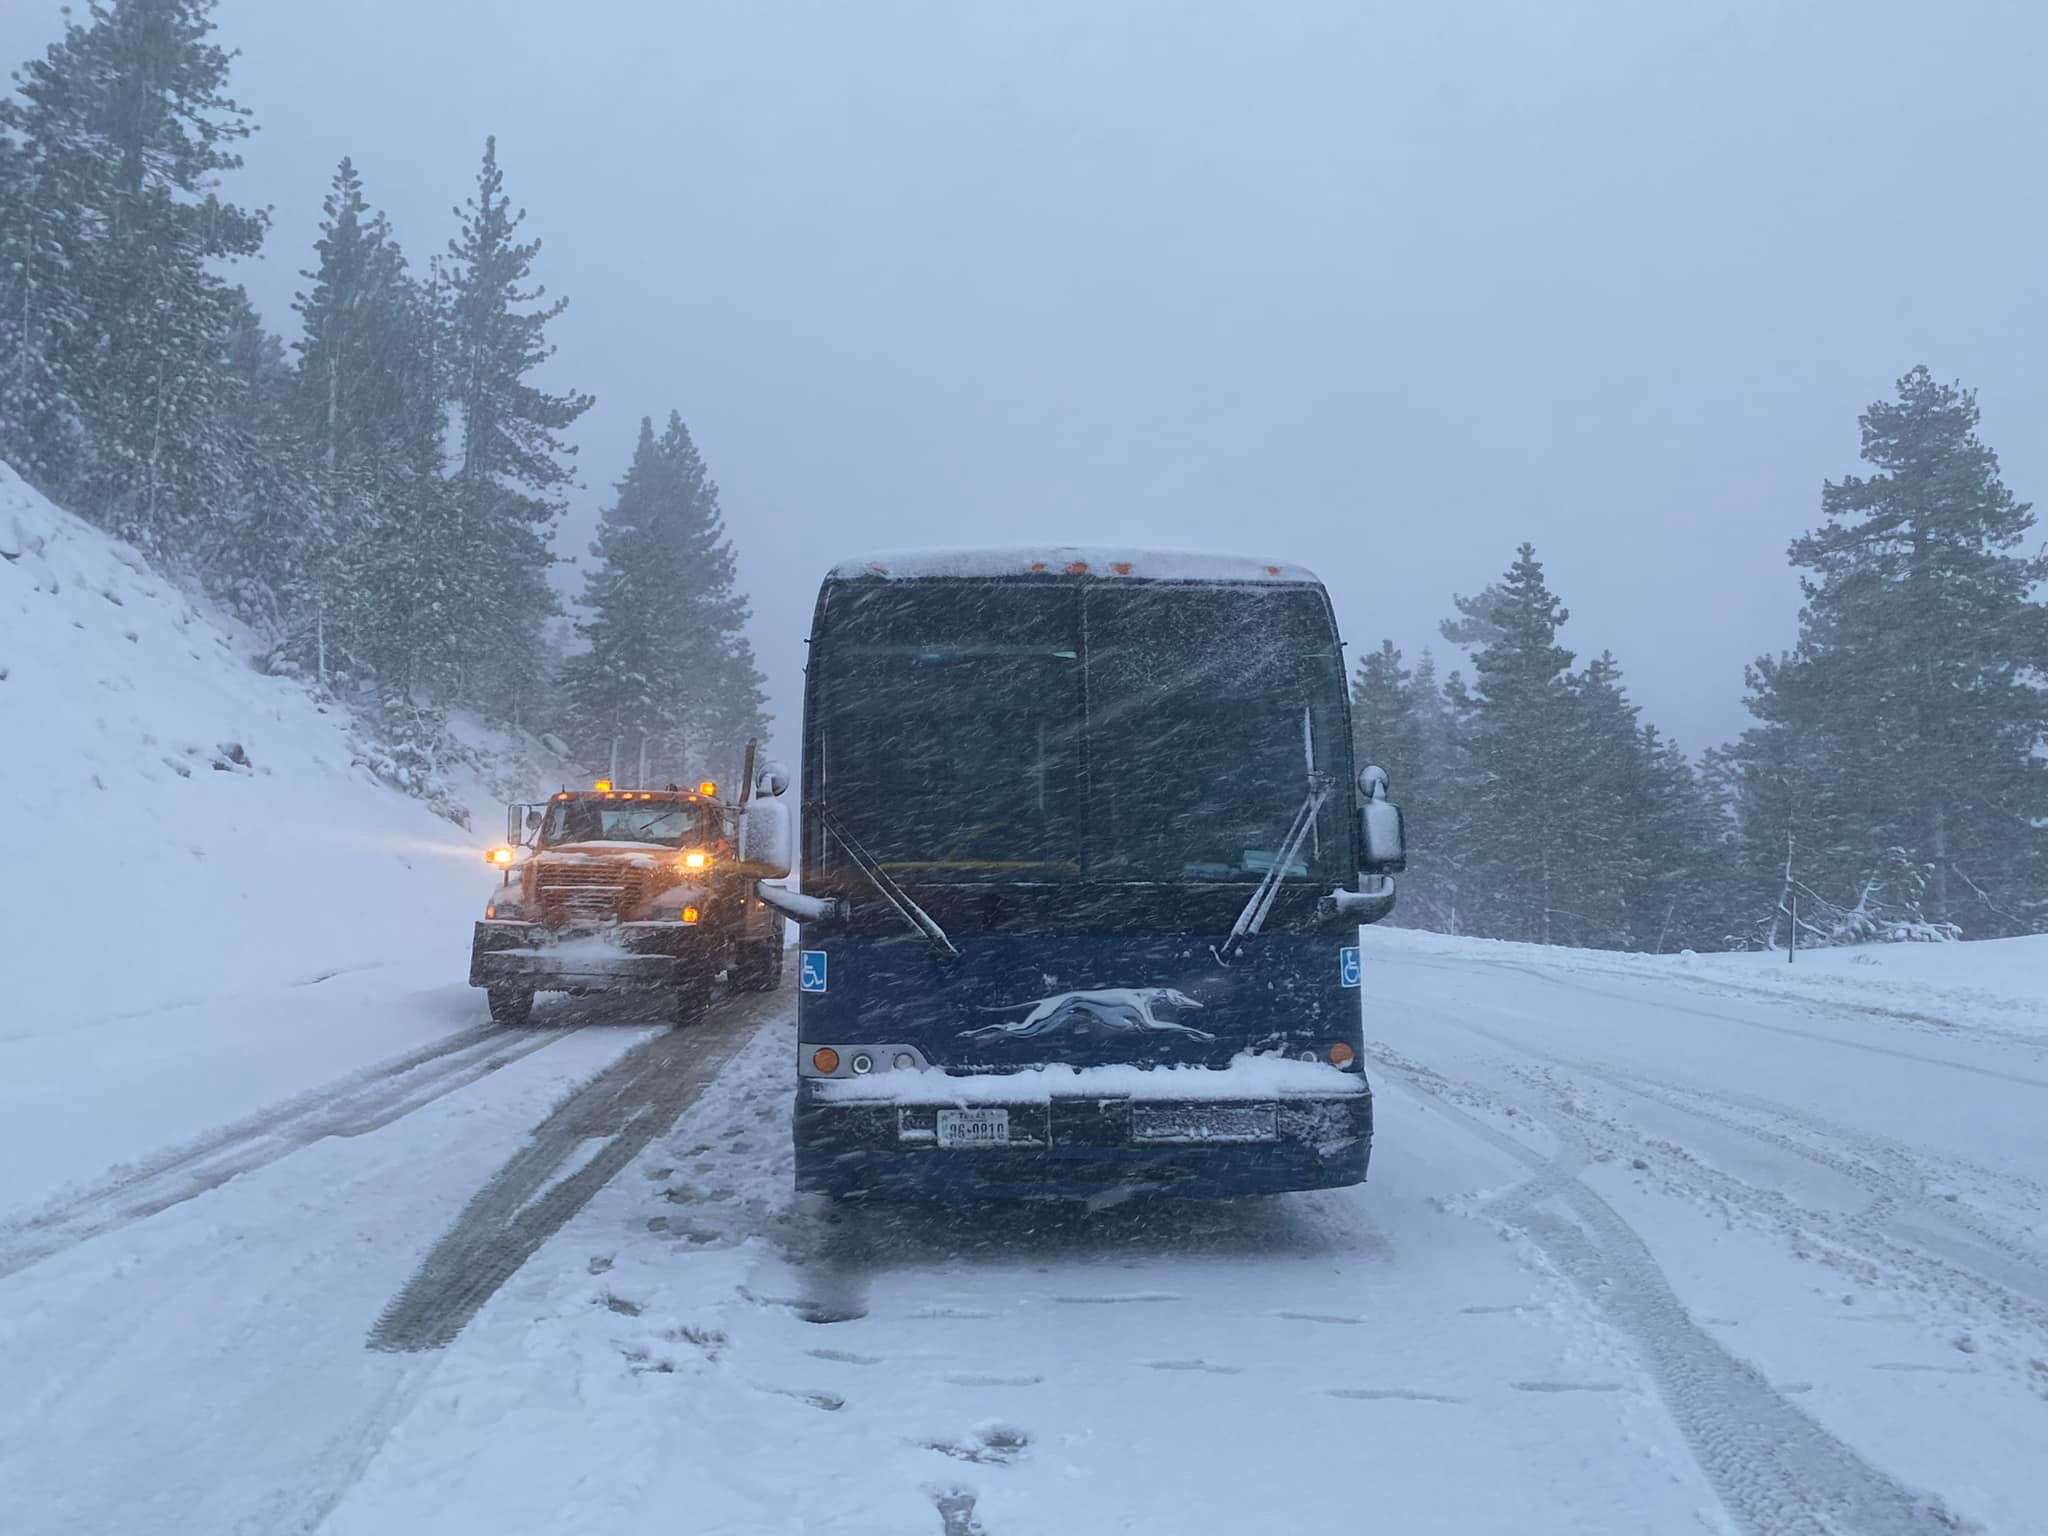 Massive Tahoe traffic jam caused by 'abandoned' bus, annoyed CHP says - SF Gate